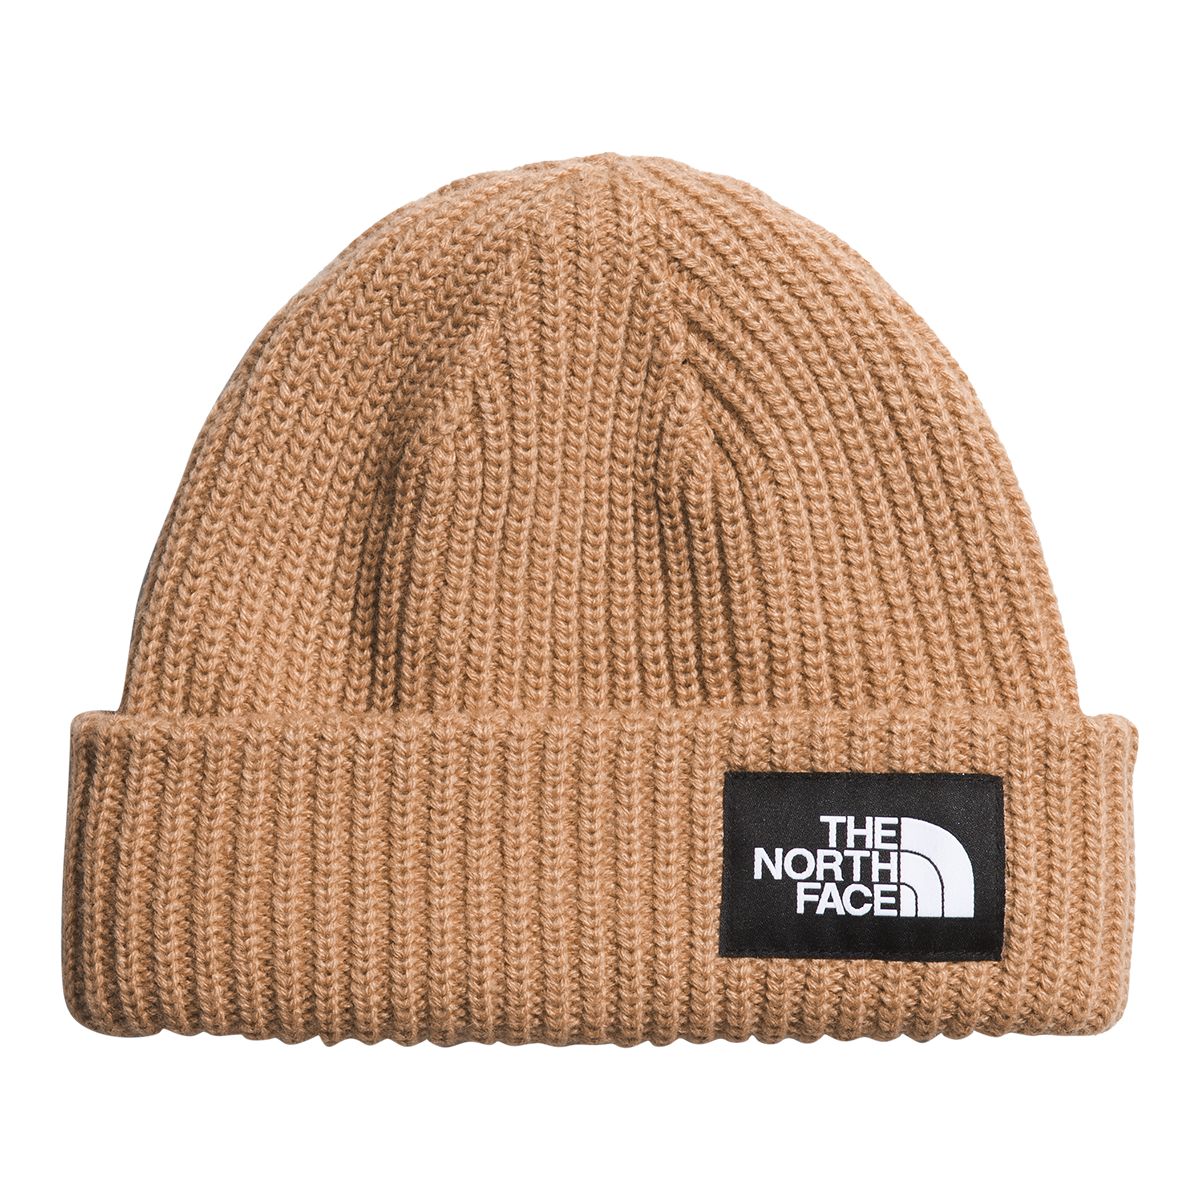 Image of The North Face Boys' Salty Dog Beanie